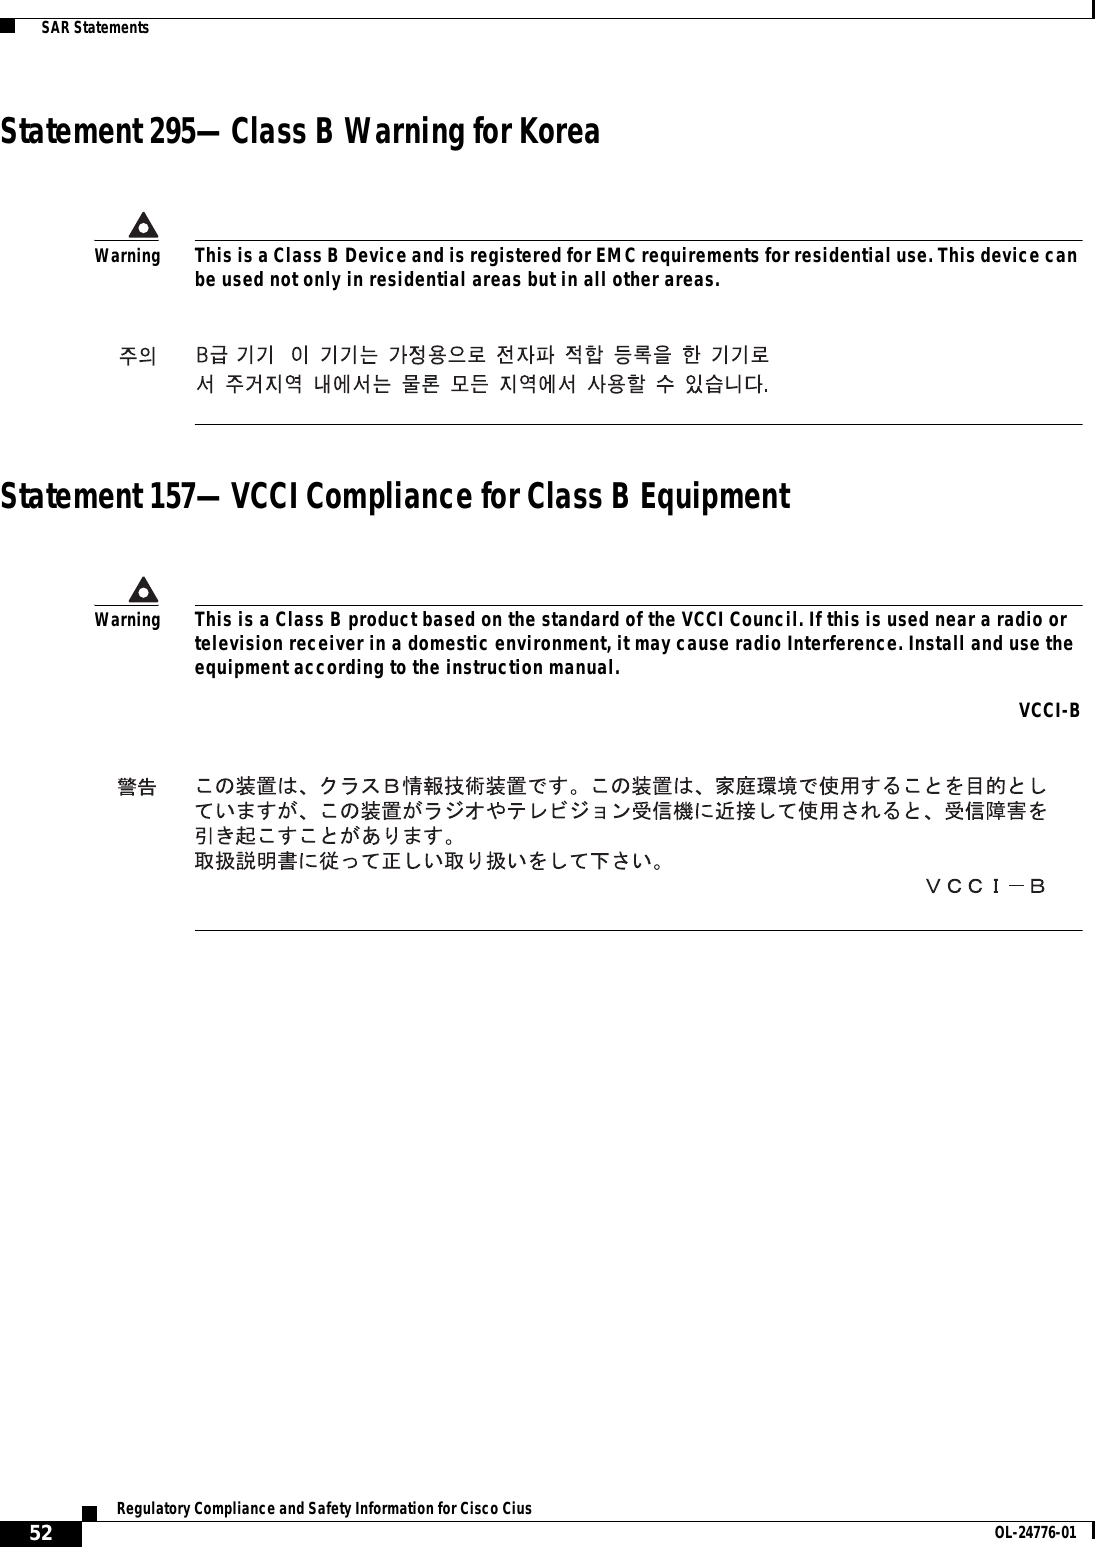  52Regulatory Compliance and Safety Information for Cisco Cius OL-24776-01  SAR StatementsStatement 295—Class B Warning for KoreaStatement 157—VCCI Compliance for Class B EquipmentWarningThis is a Class B Device and is registered for EMC requirements for residential use. This device can be used not only in residential areas but in all other areas.WarningThis is a Class B product based on the standard of the VCCI Council. If this is used near a radio or television receiver in a domestic environment, it may cause radio Interference. Install and use the equipment according to the instruction manual. VCCI-B